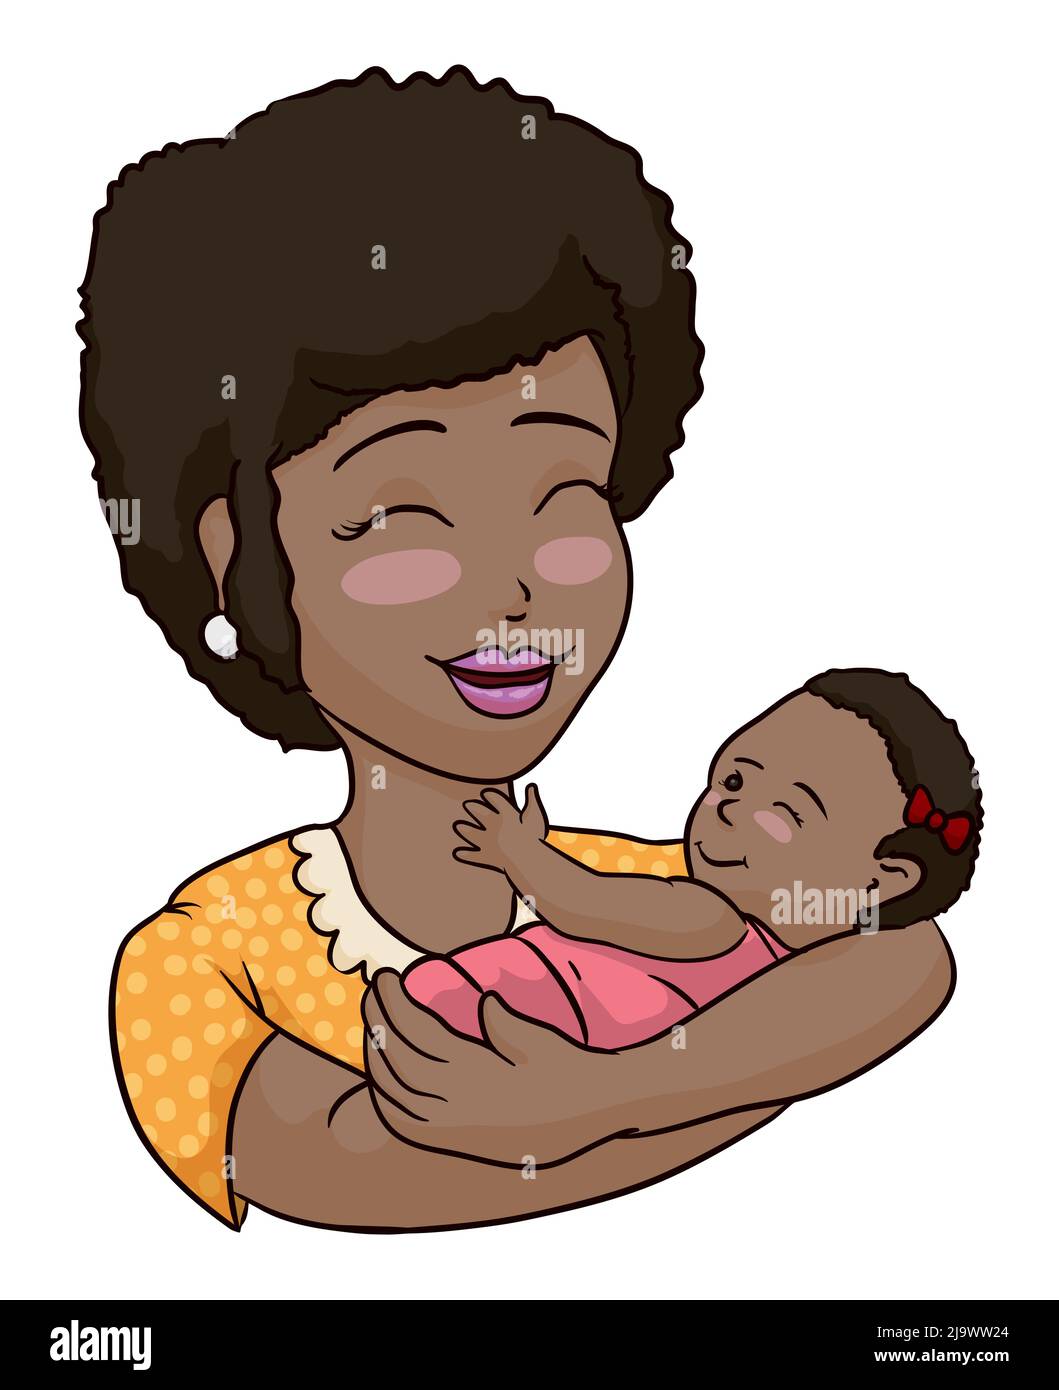 Smiling brunette mom, with afro hair and blushed gesture, carrying her newborn baby girl in arms. Stock Vector